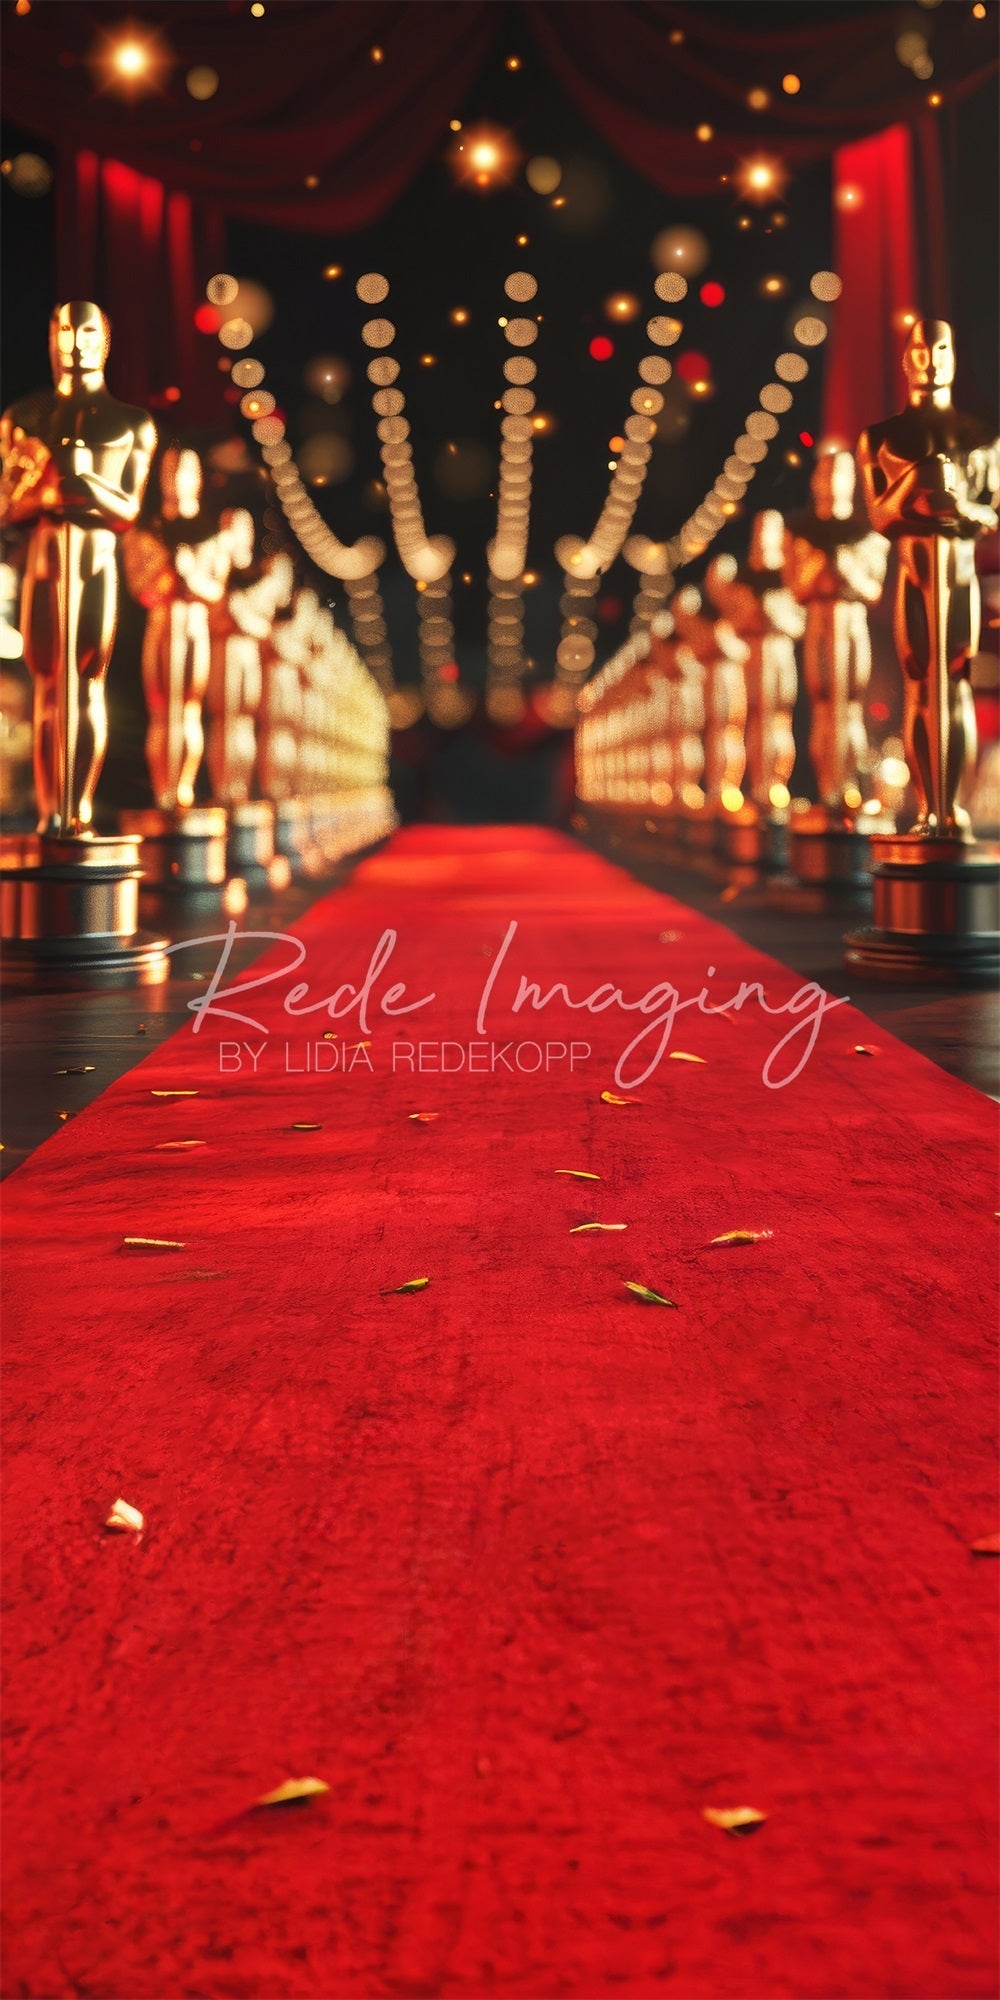 TEST kate Sweep Retro Movie Red Carpet Stage Backdrop Designed by Lidia Redekopp